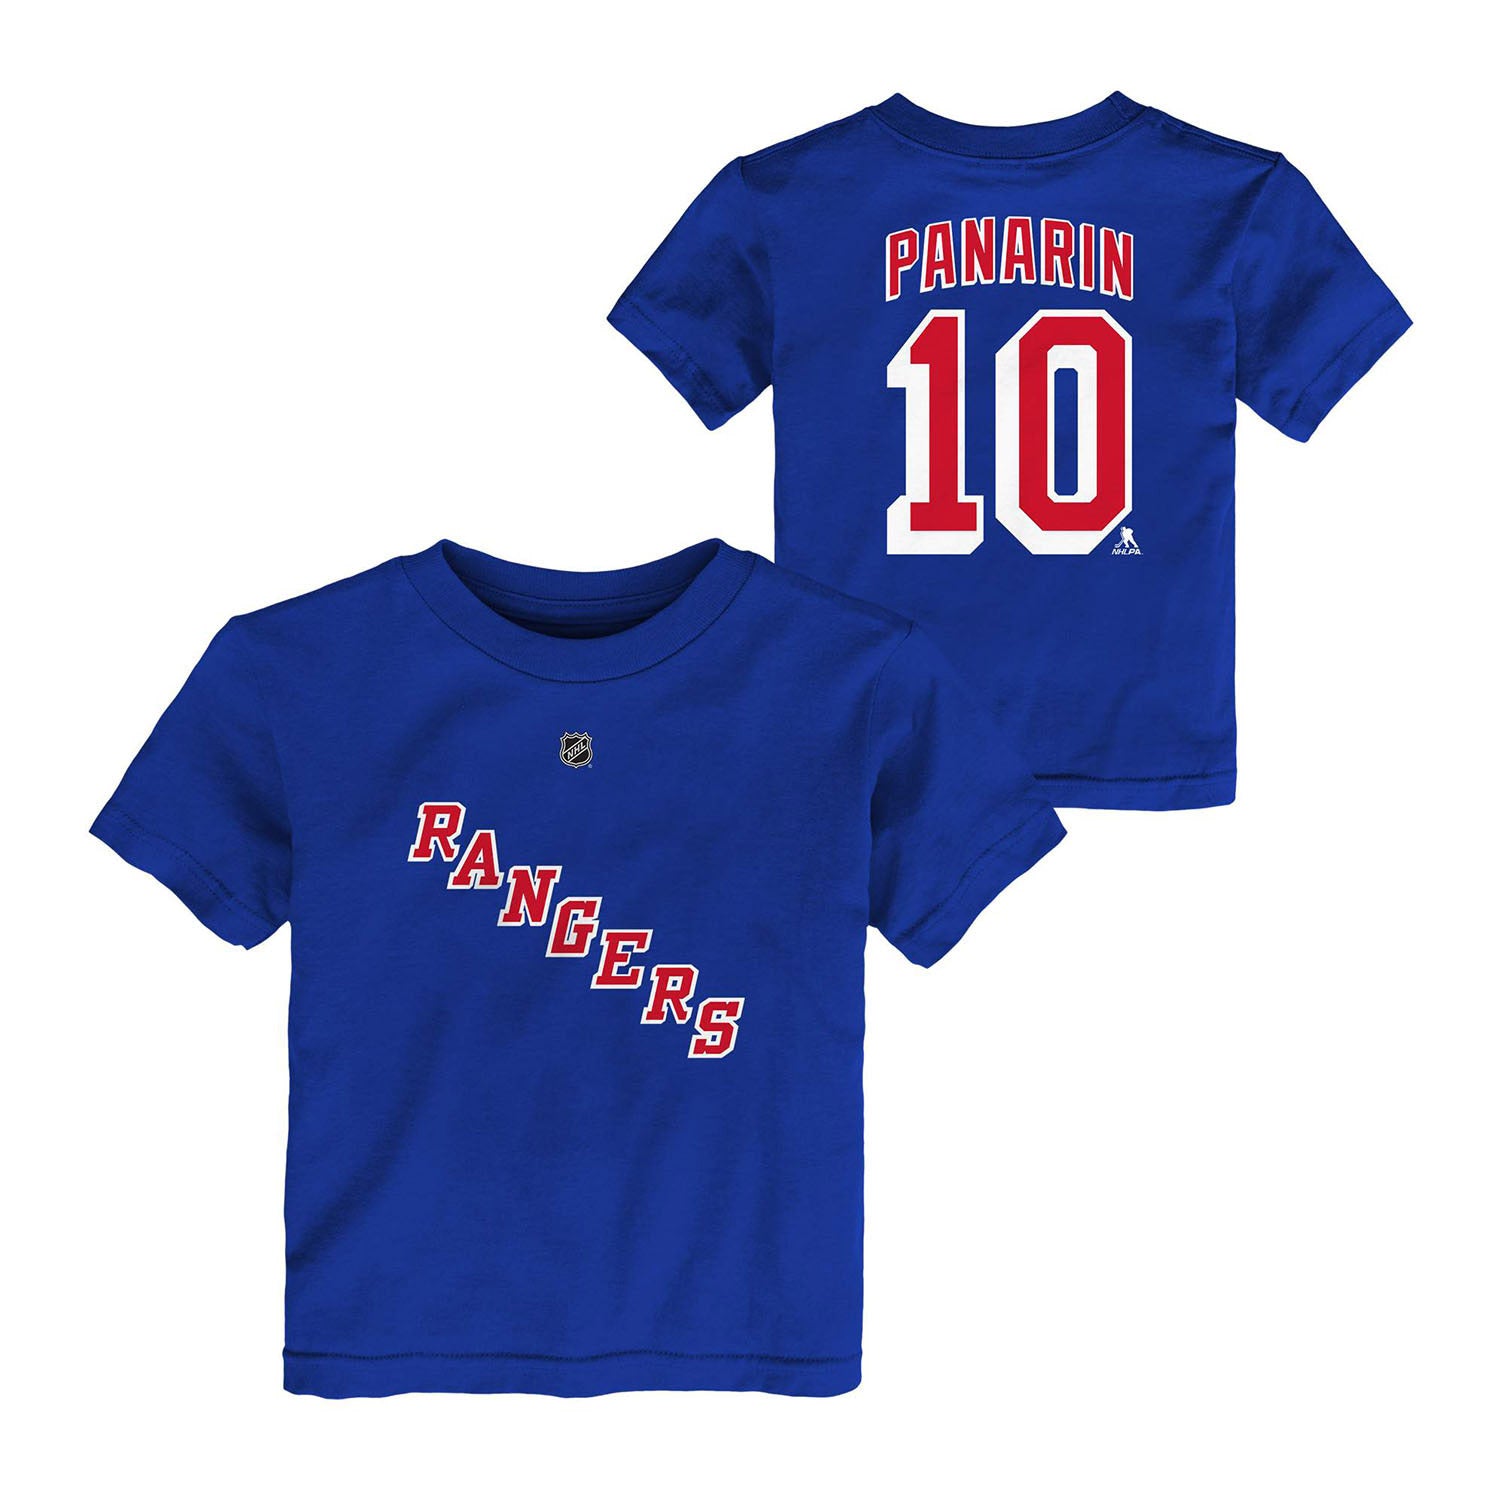 Outerstuff New York Rangers Tee - Panarin - Youth